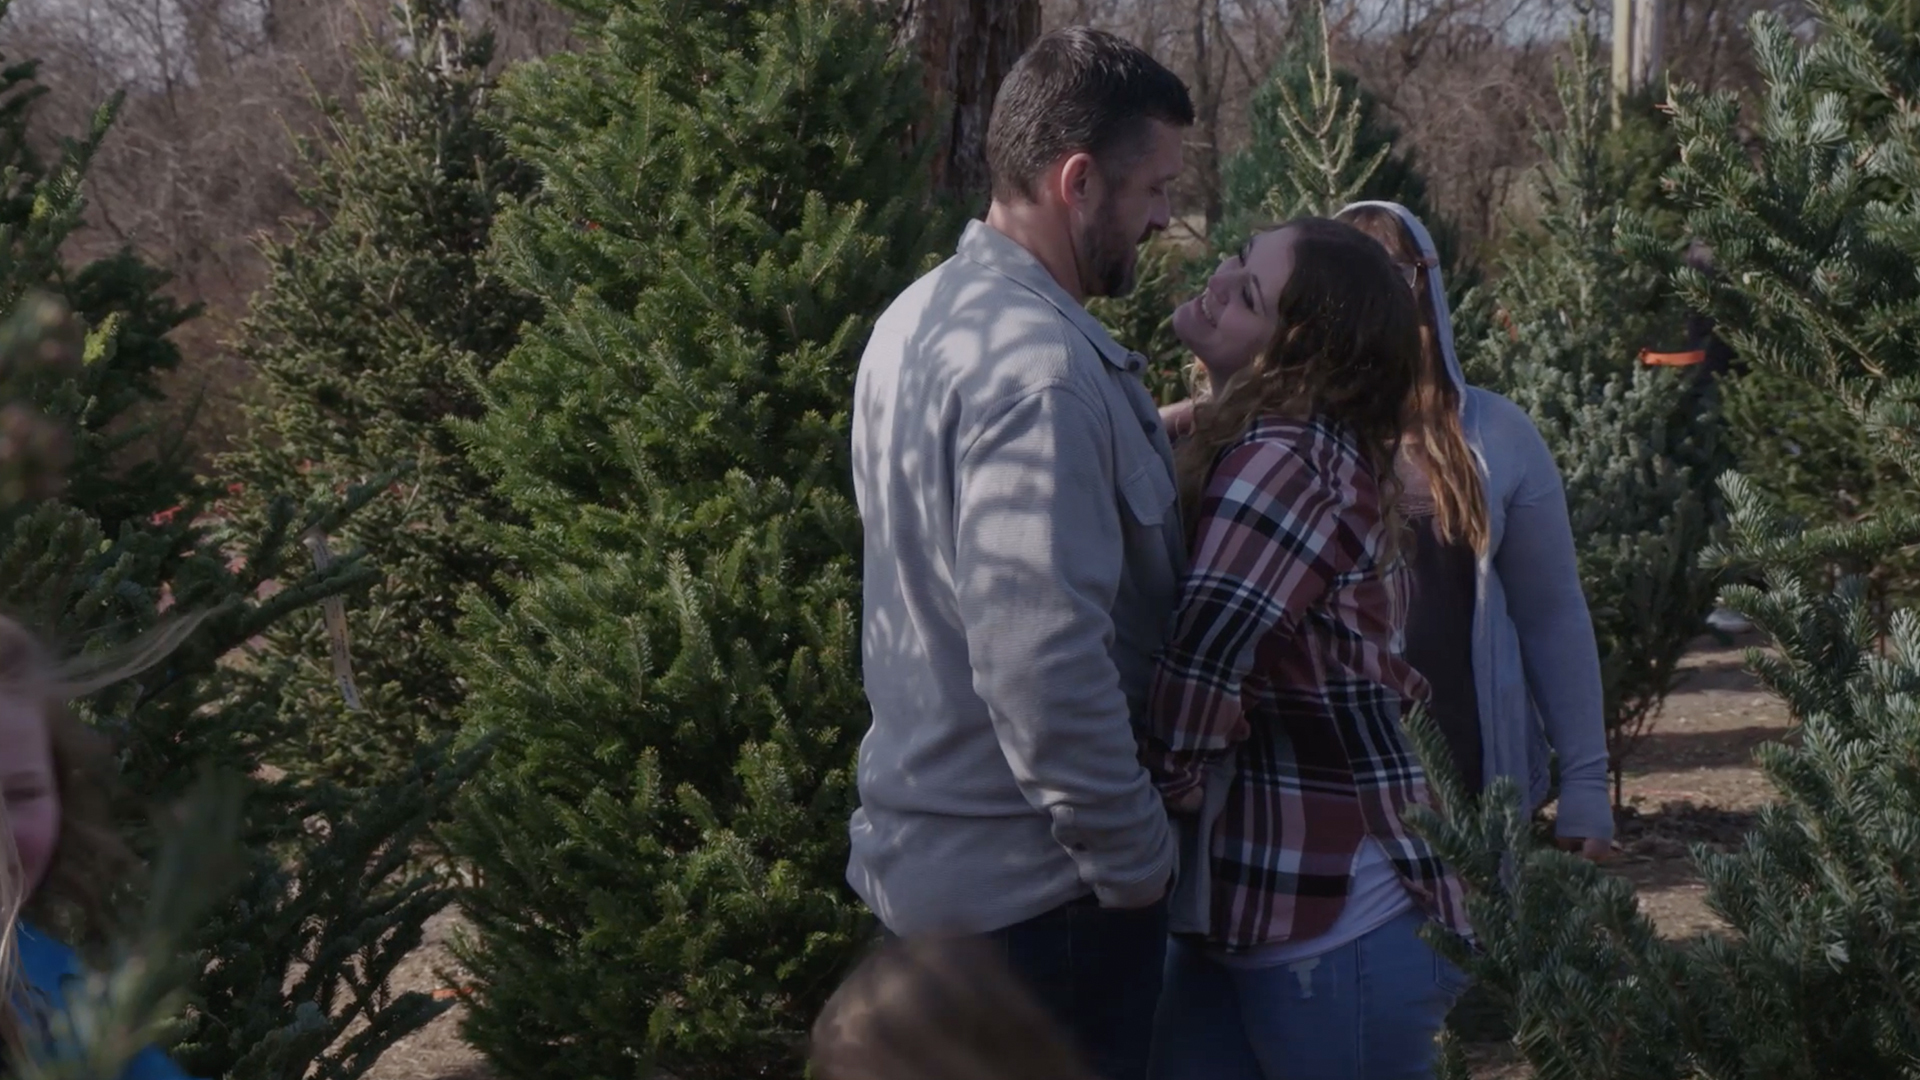 Watch Deleted Scene: Tayler & Chance Go Christmas Tree Shopping! | Love After Lockup Video Extras